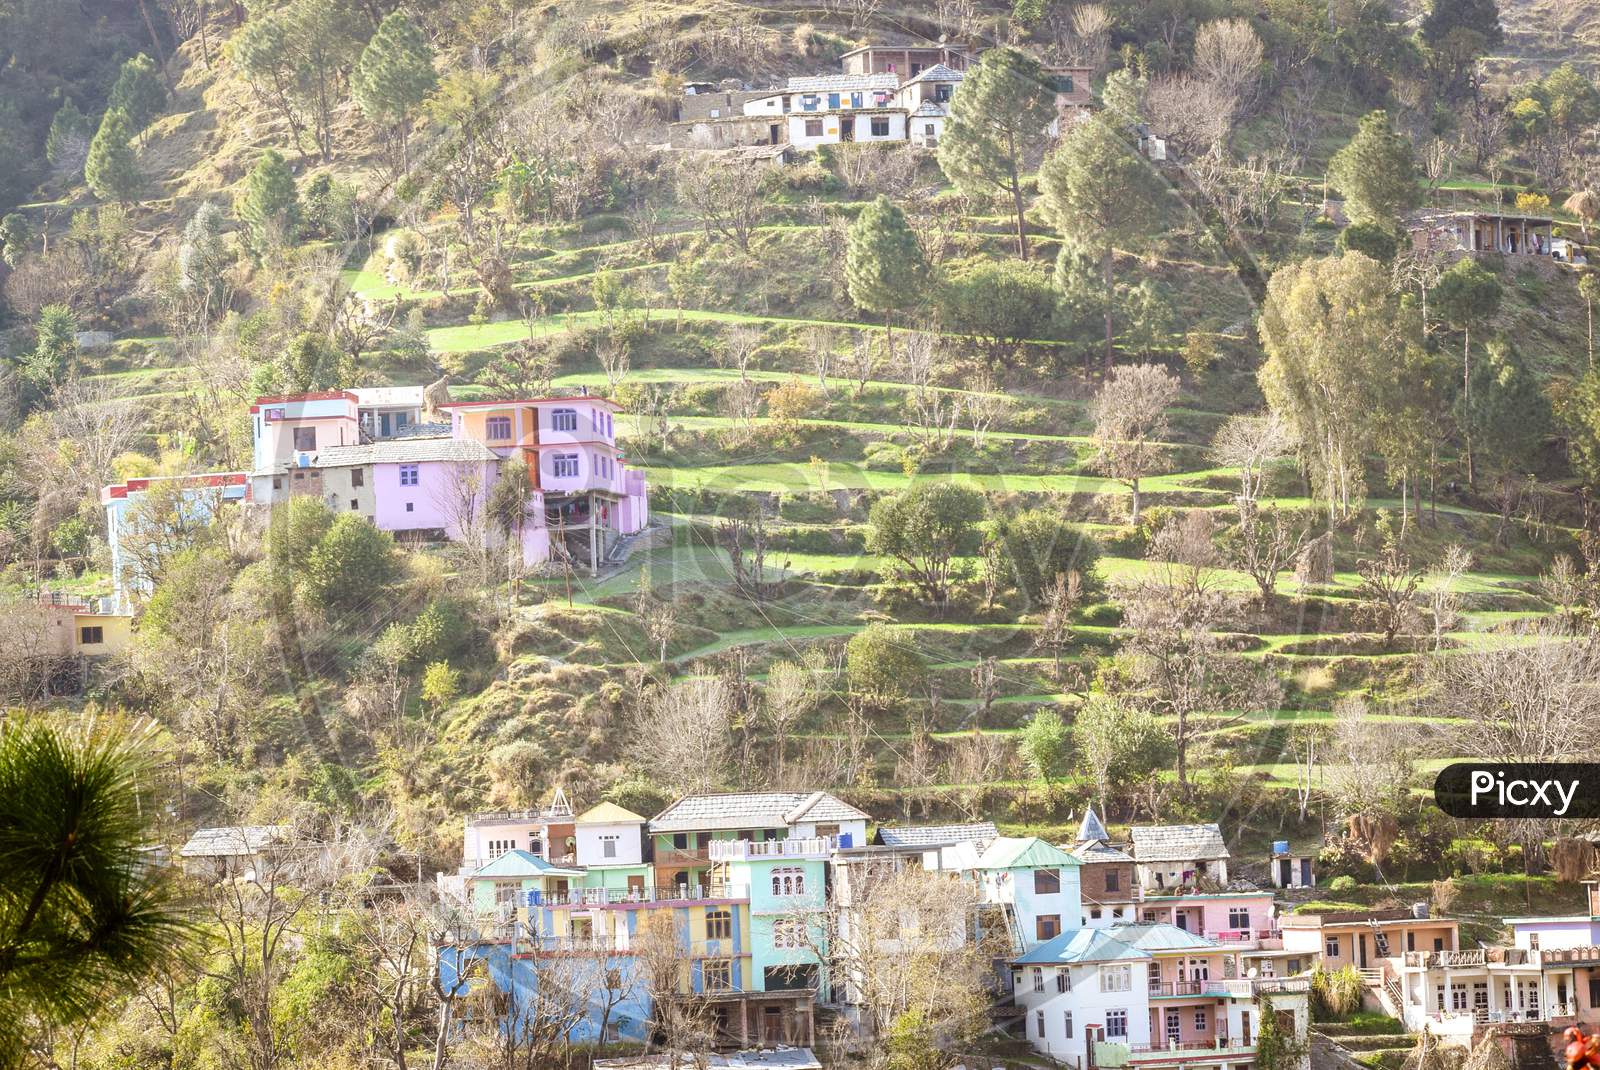 Houses on mountain in Indian village.